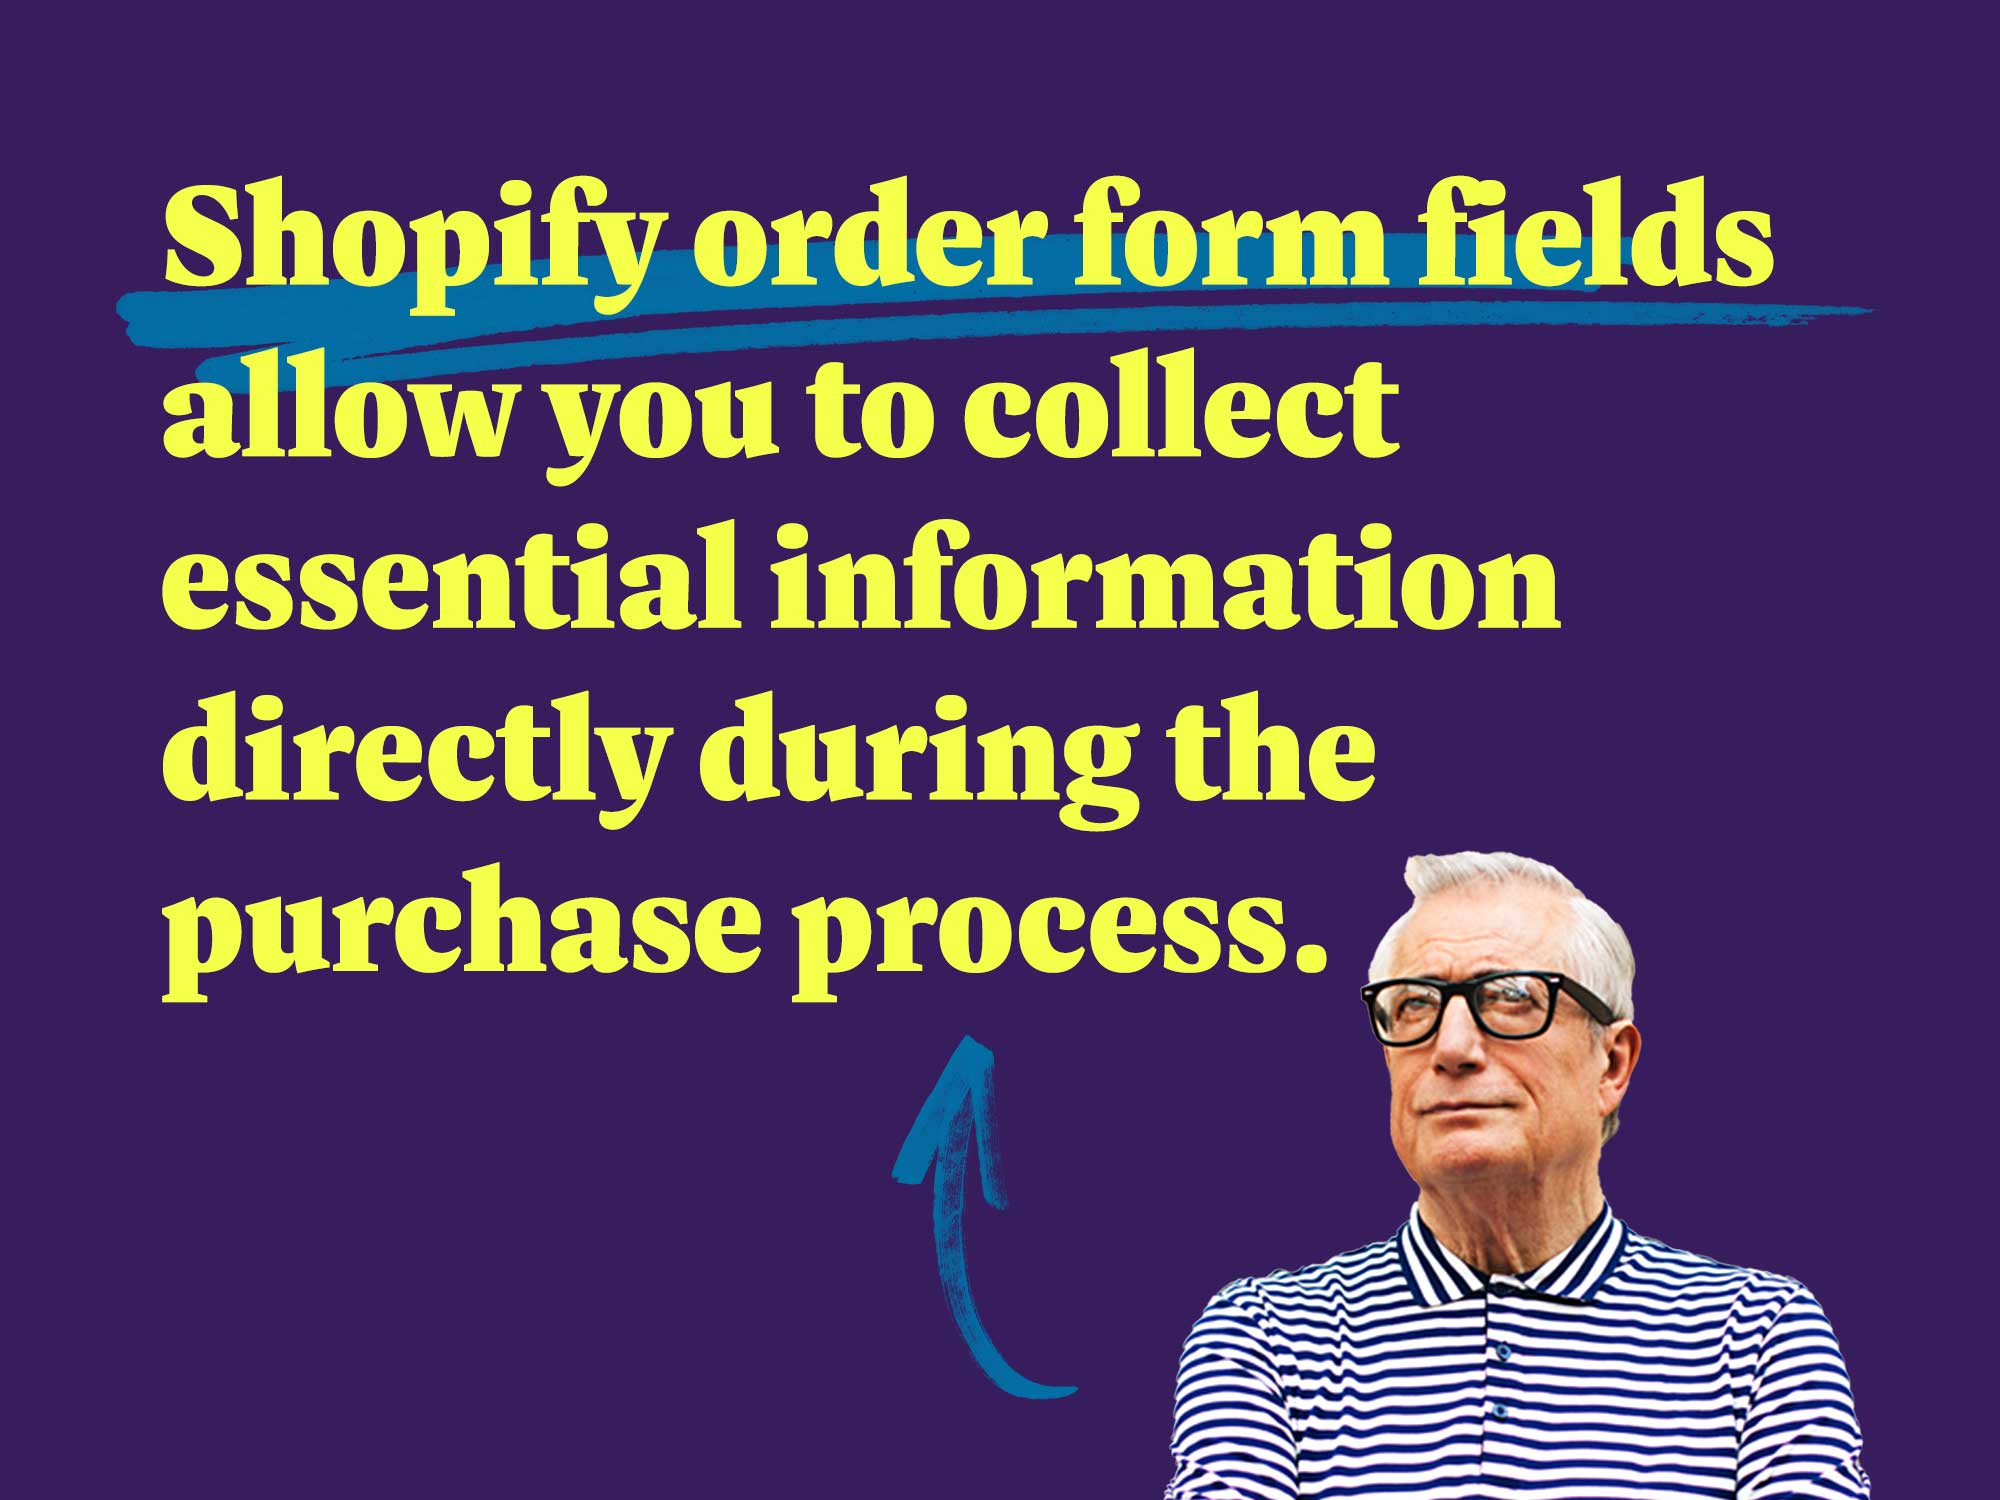 Shopify order form fields allow you to collect essential information directly during the purchase process.